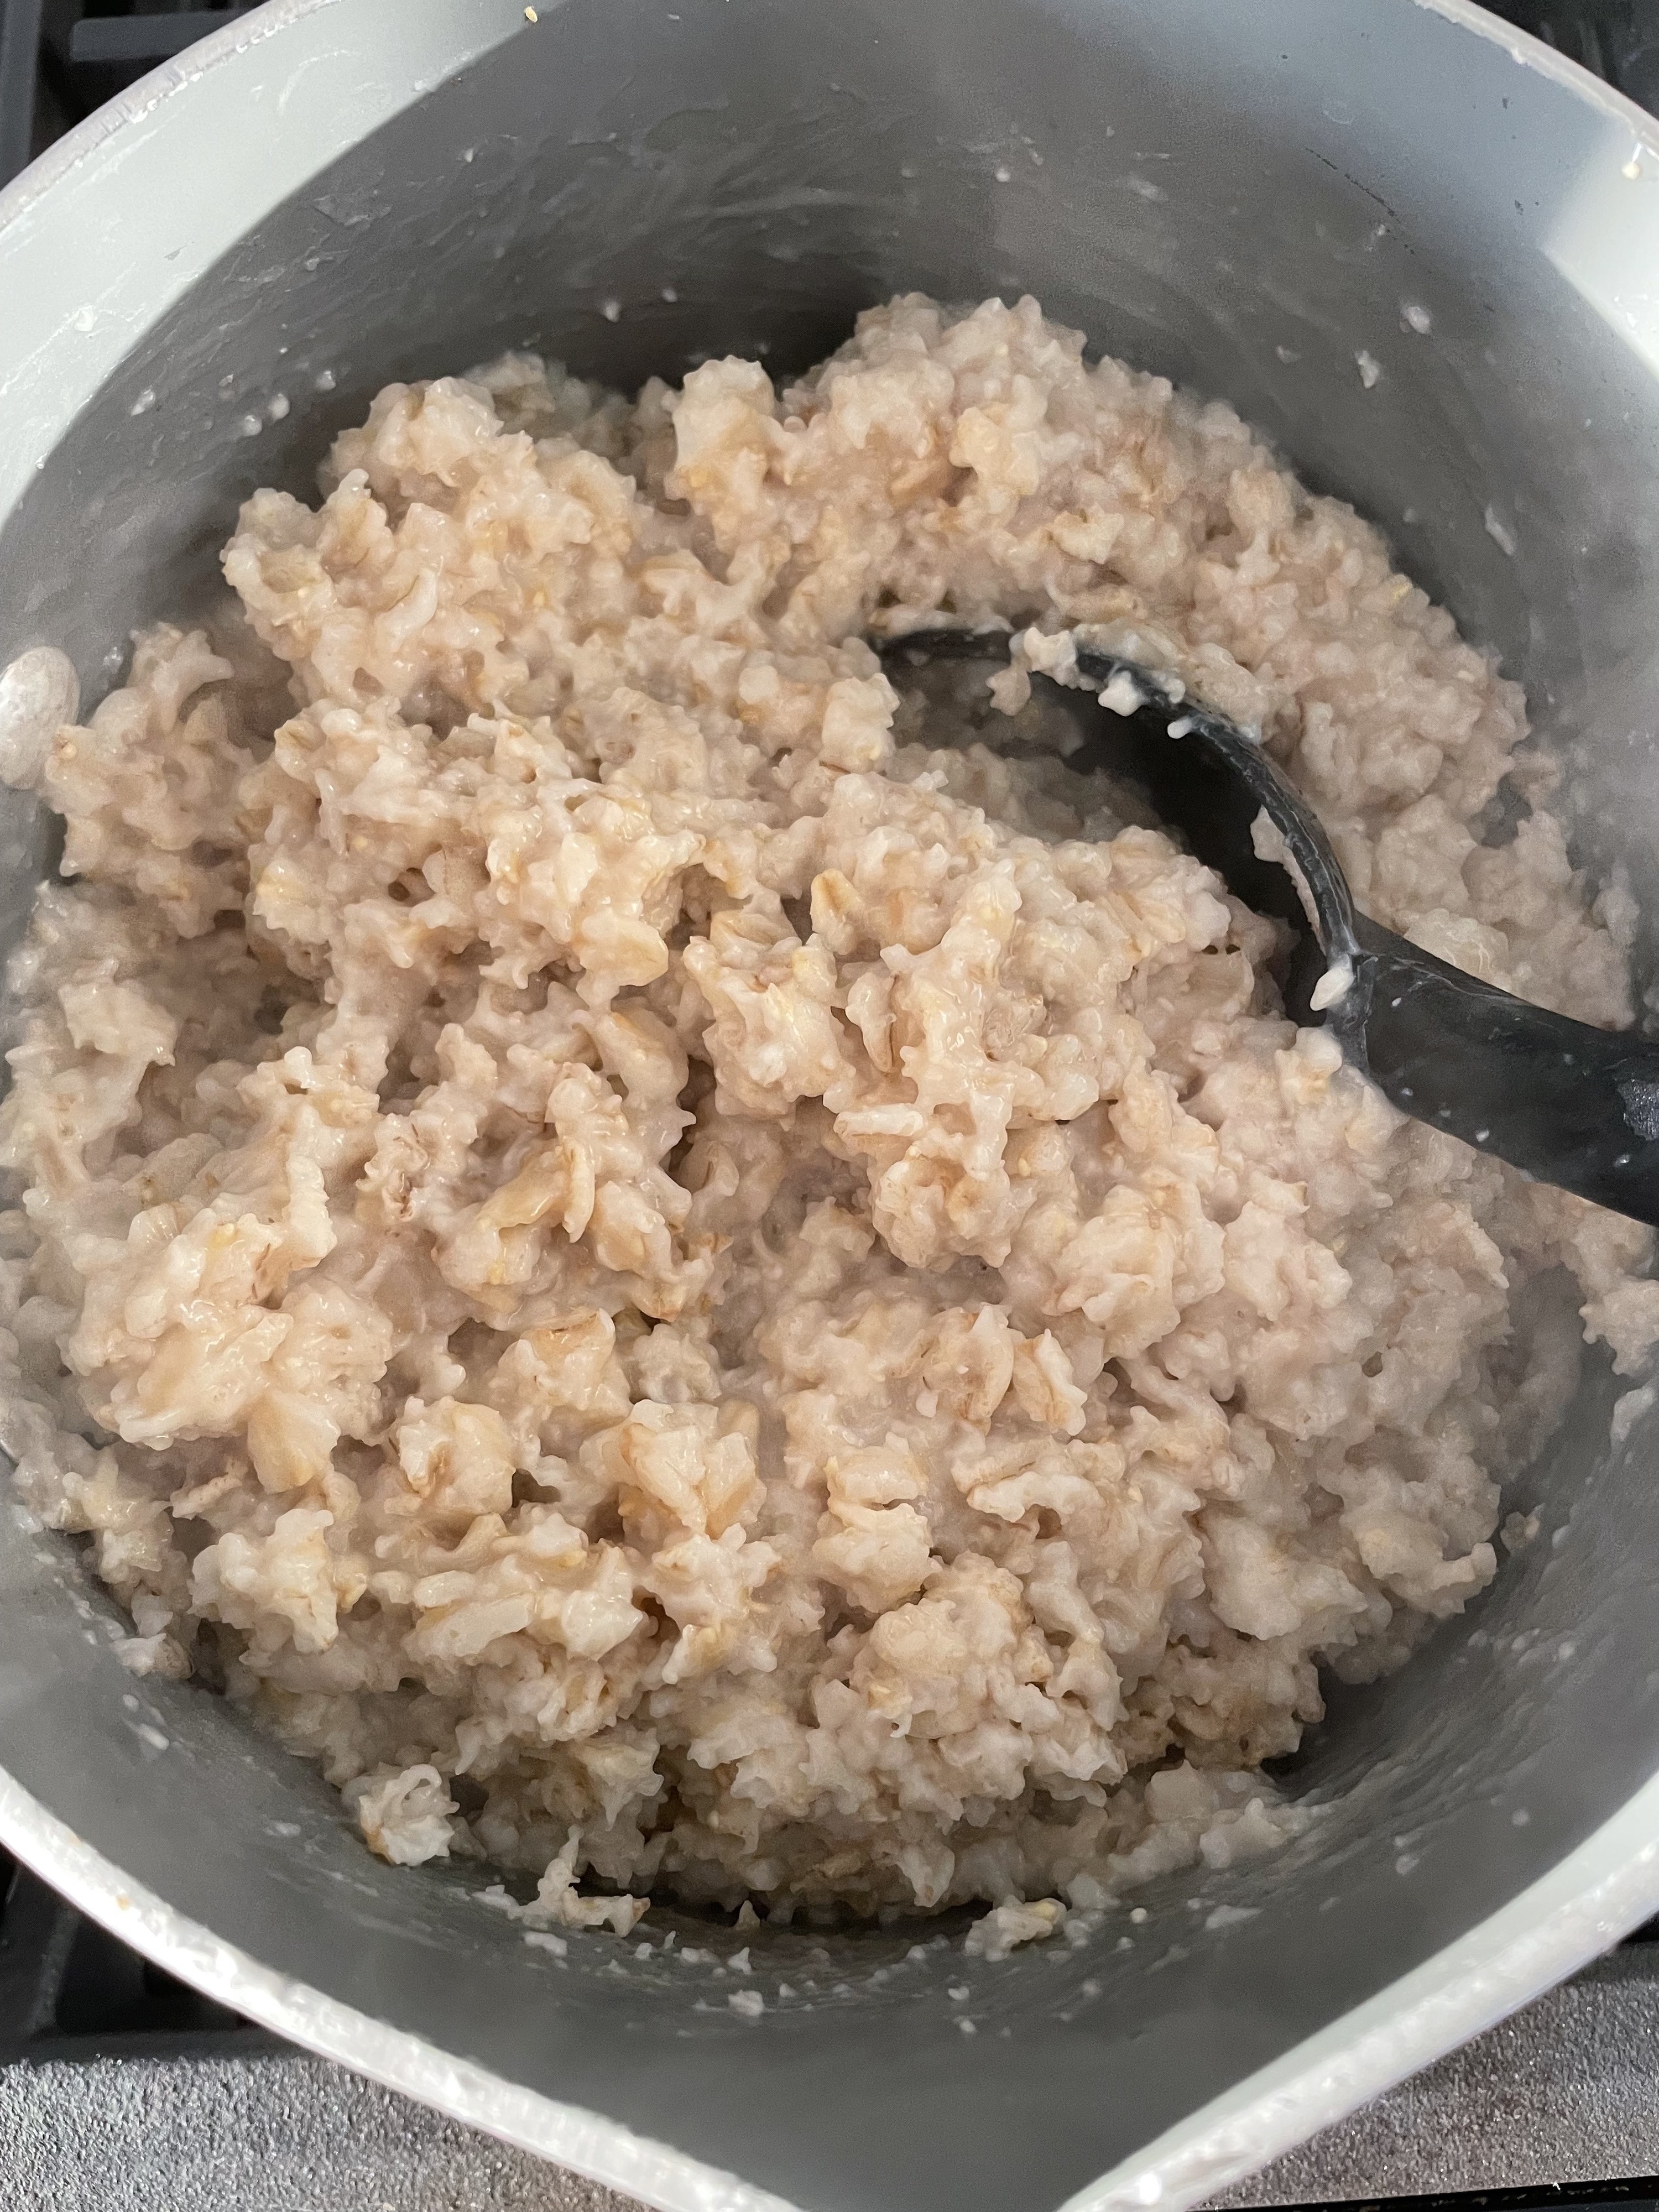 Oatmeal cooking on the stovetop